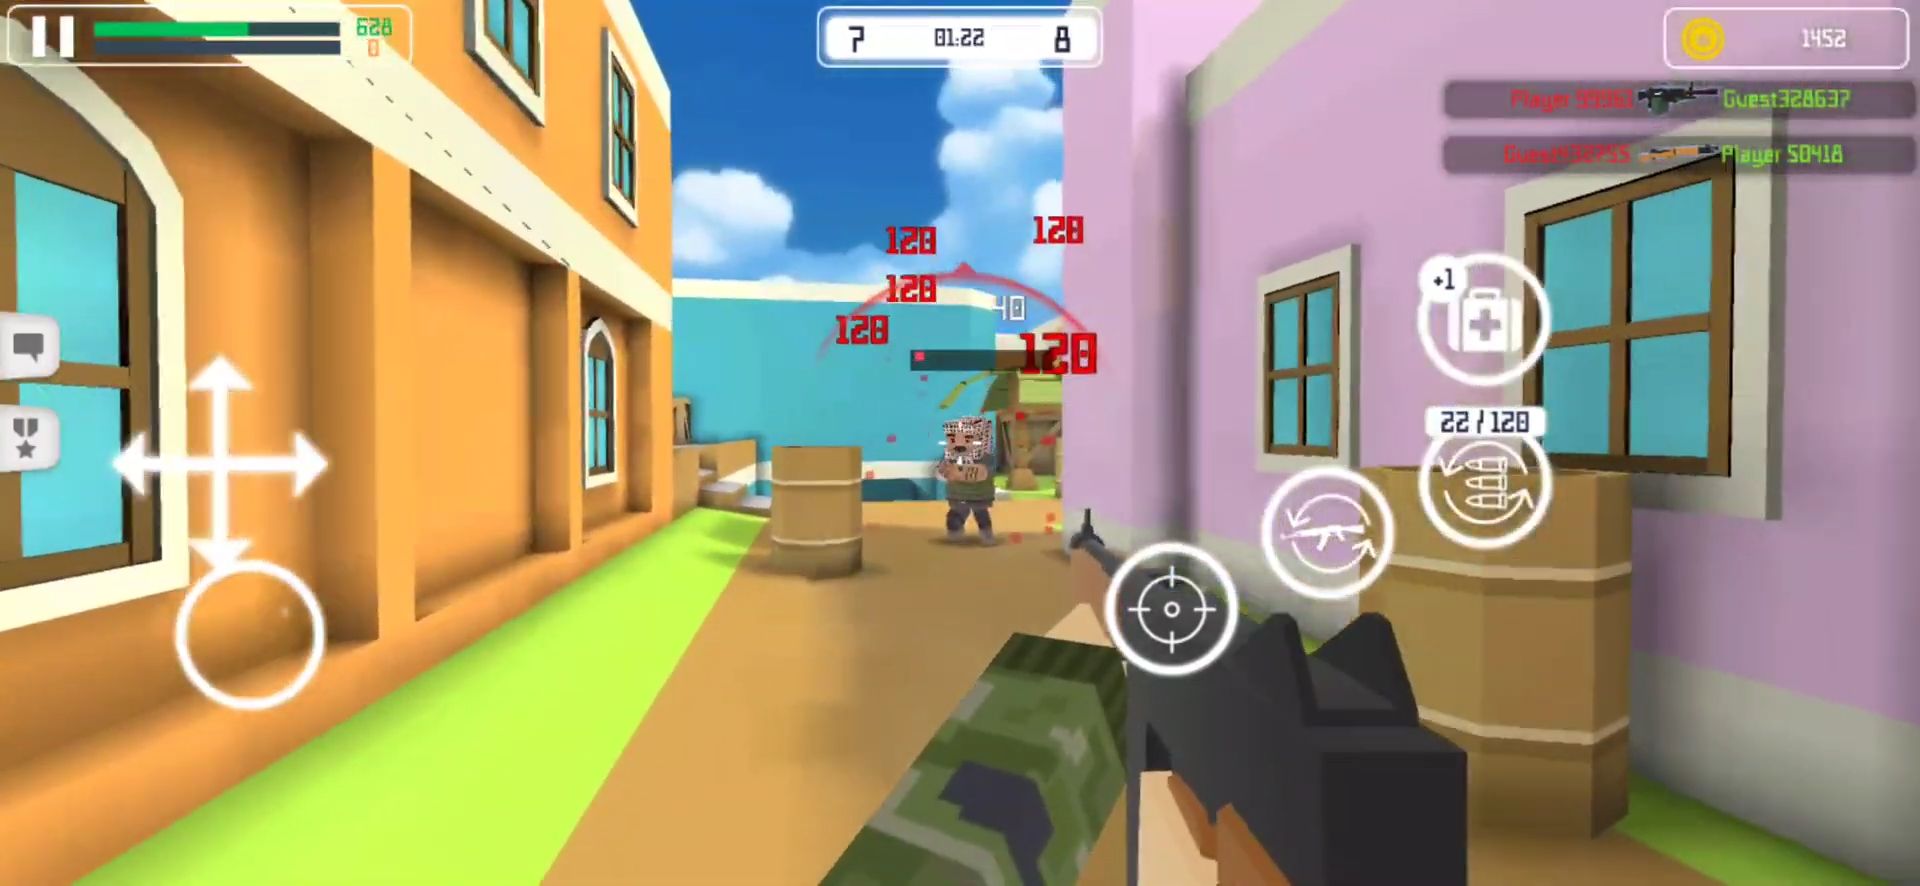 Gameplay of the Block Gun: FPS PvP War - Online Gun Shooting Games for Android phone or tablet.